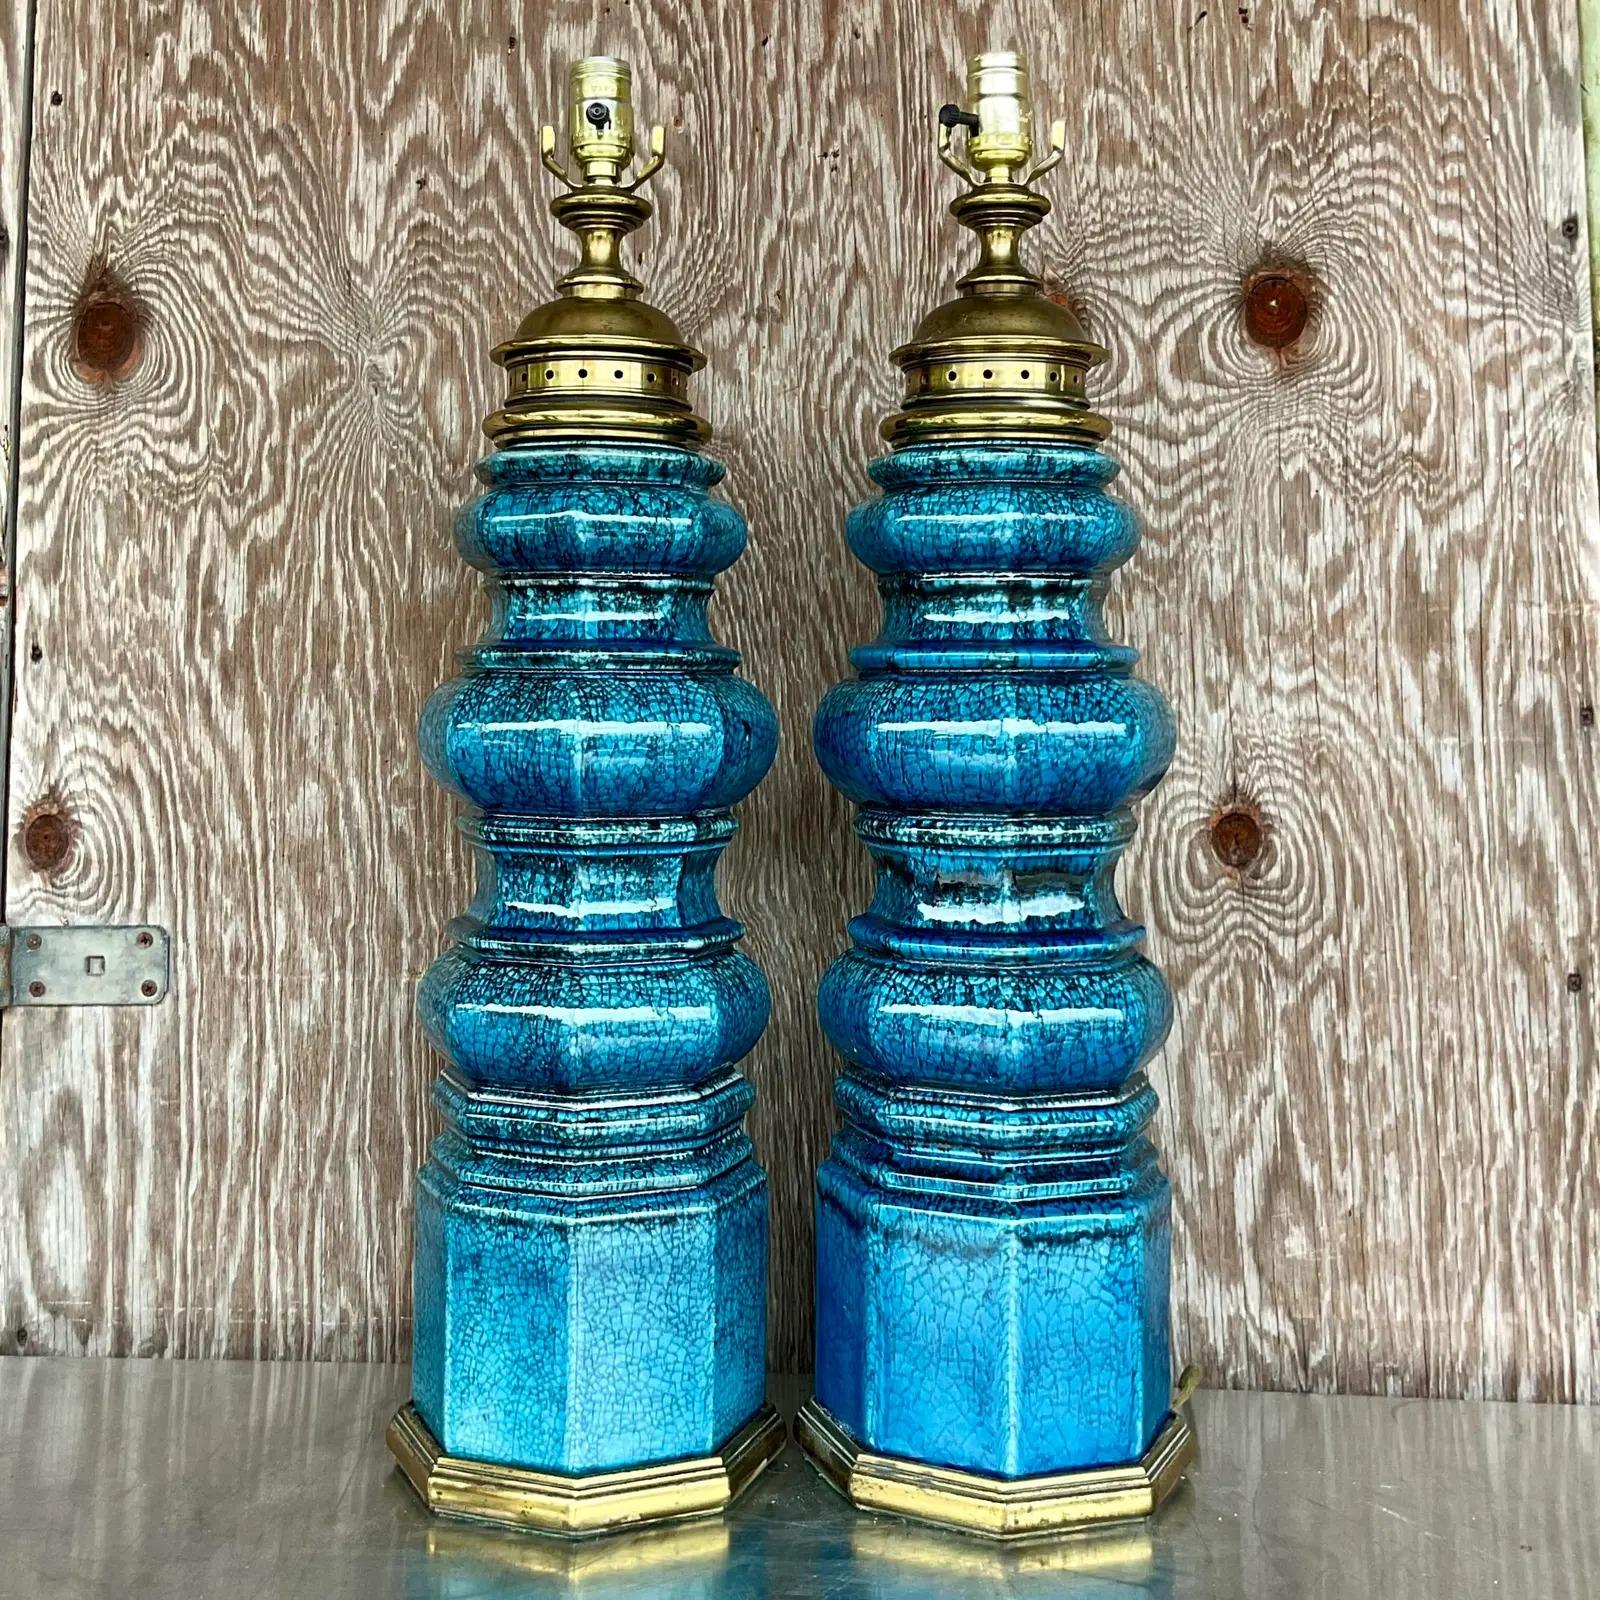 A gorgeous pair of large vintage blue crackle glazed ceramic totem/pagoda lamps with satin brass hardware. Acquired at a Palm Beach estate.